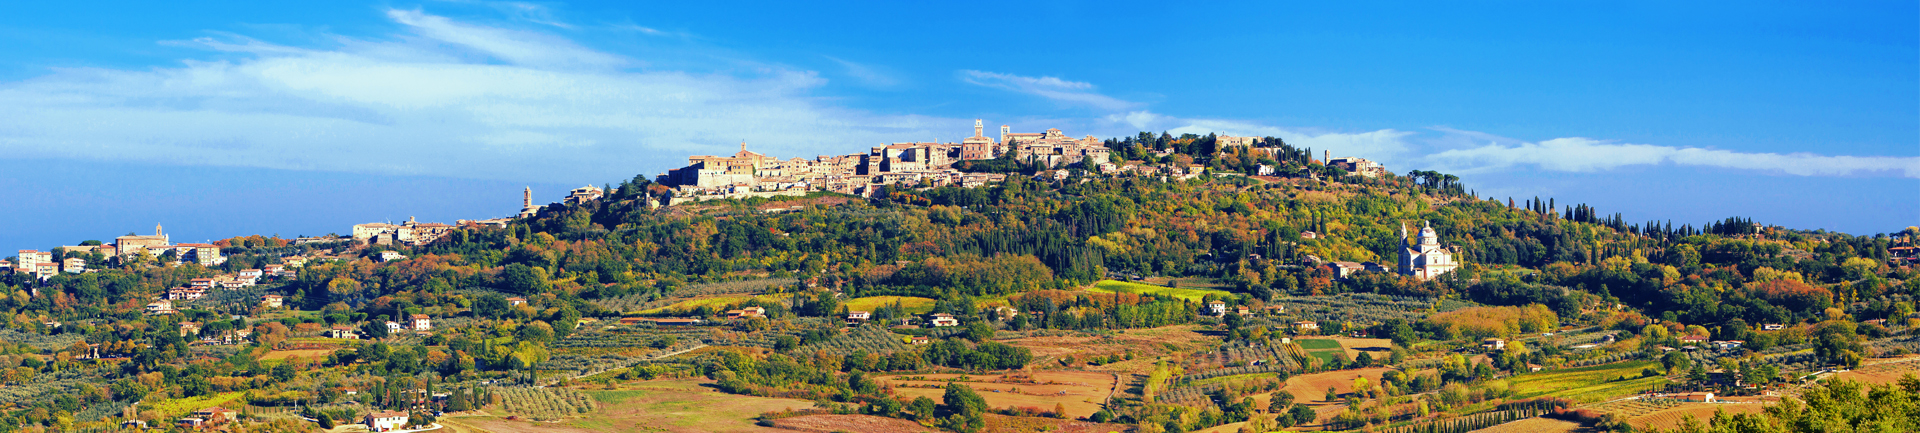 Montepulciano. A place of great beauty.